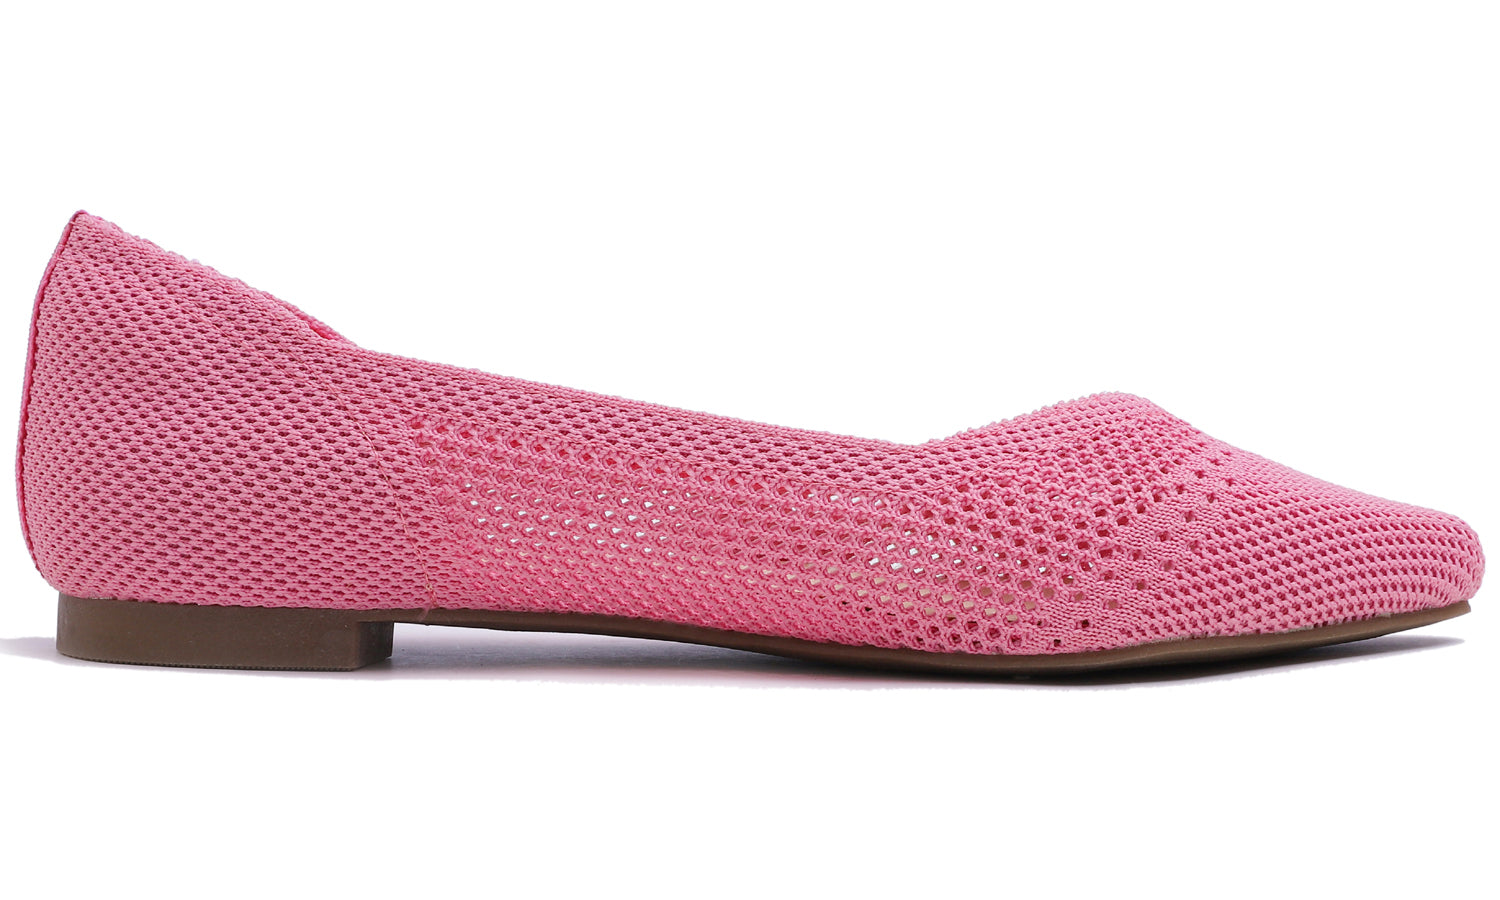 Feversole Women's Woven Fashion Breathable Knit Flat Shoes Pointed Hot Pink